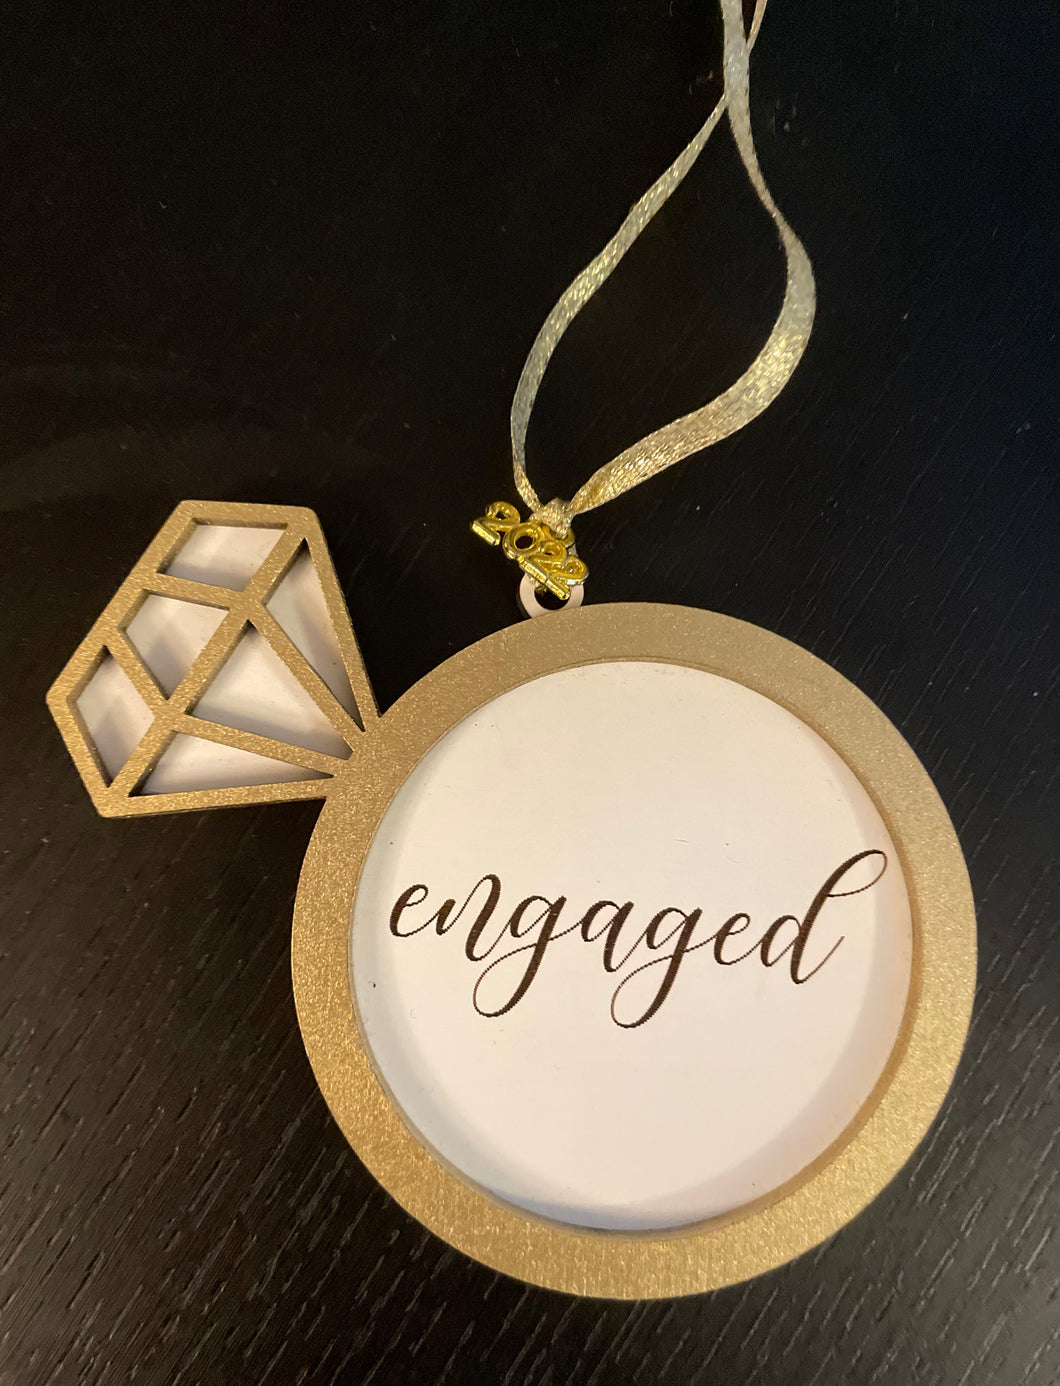 Engaged ornament 2023